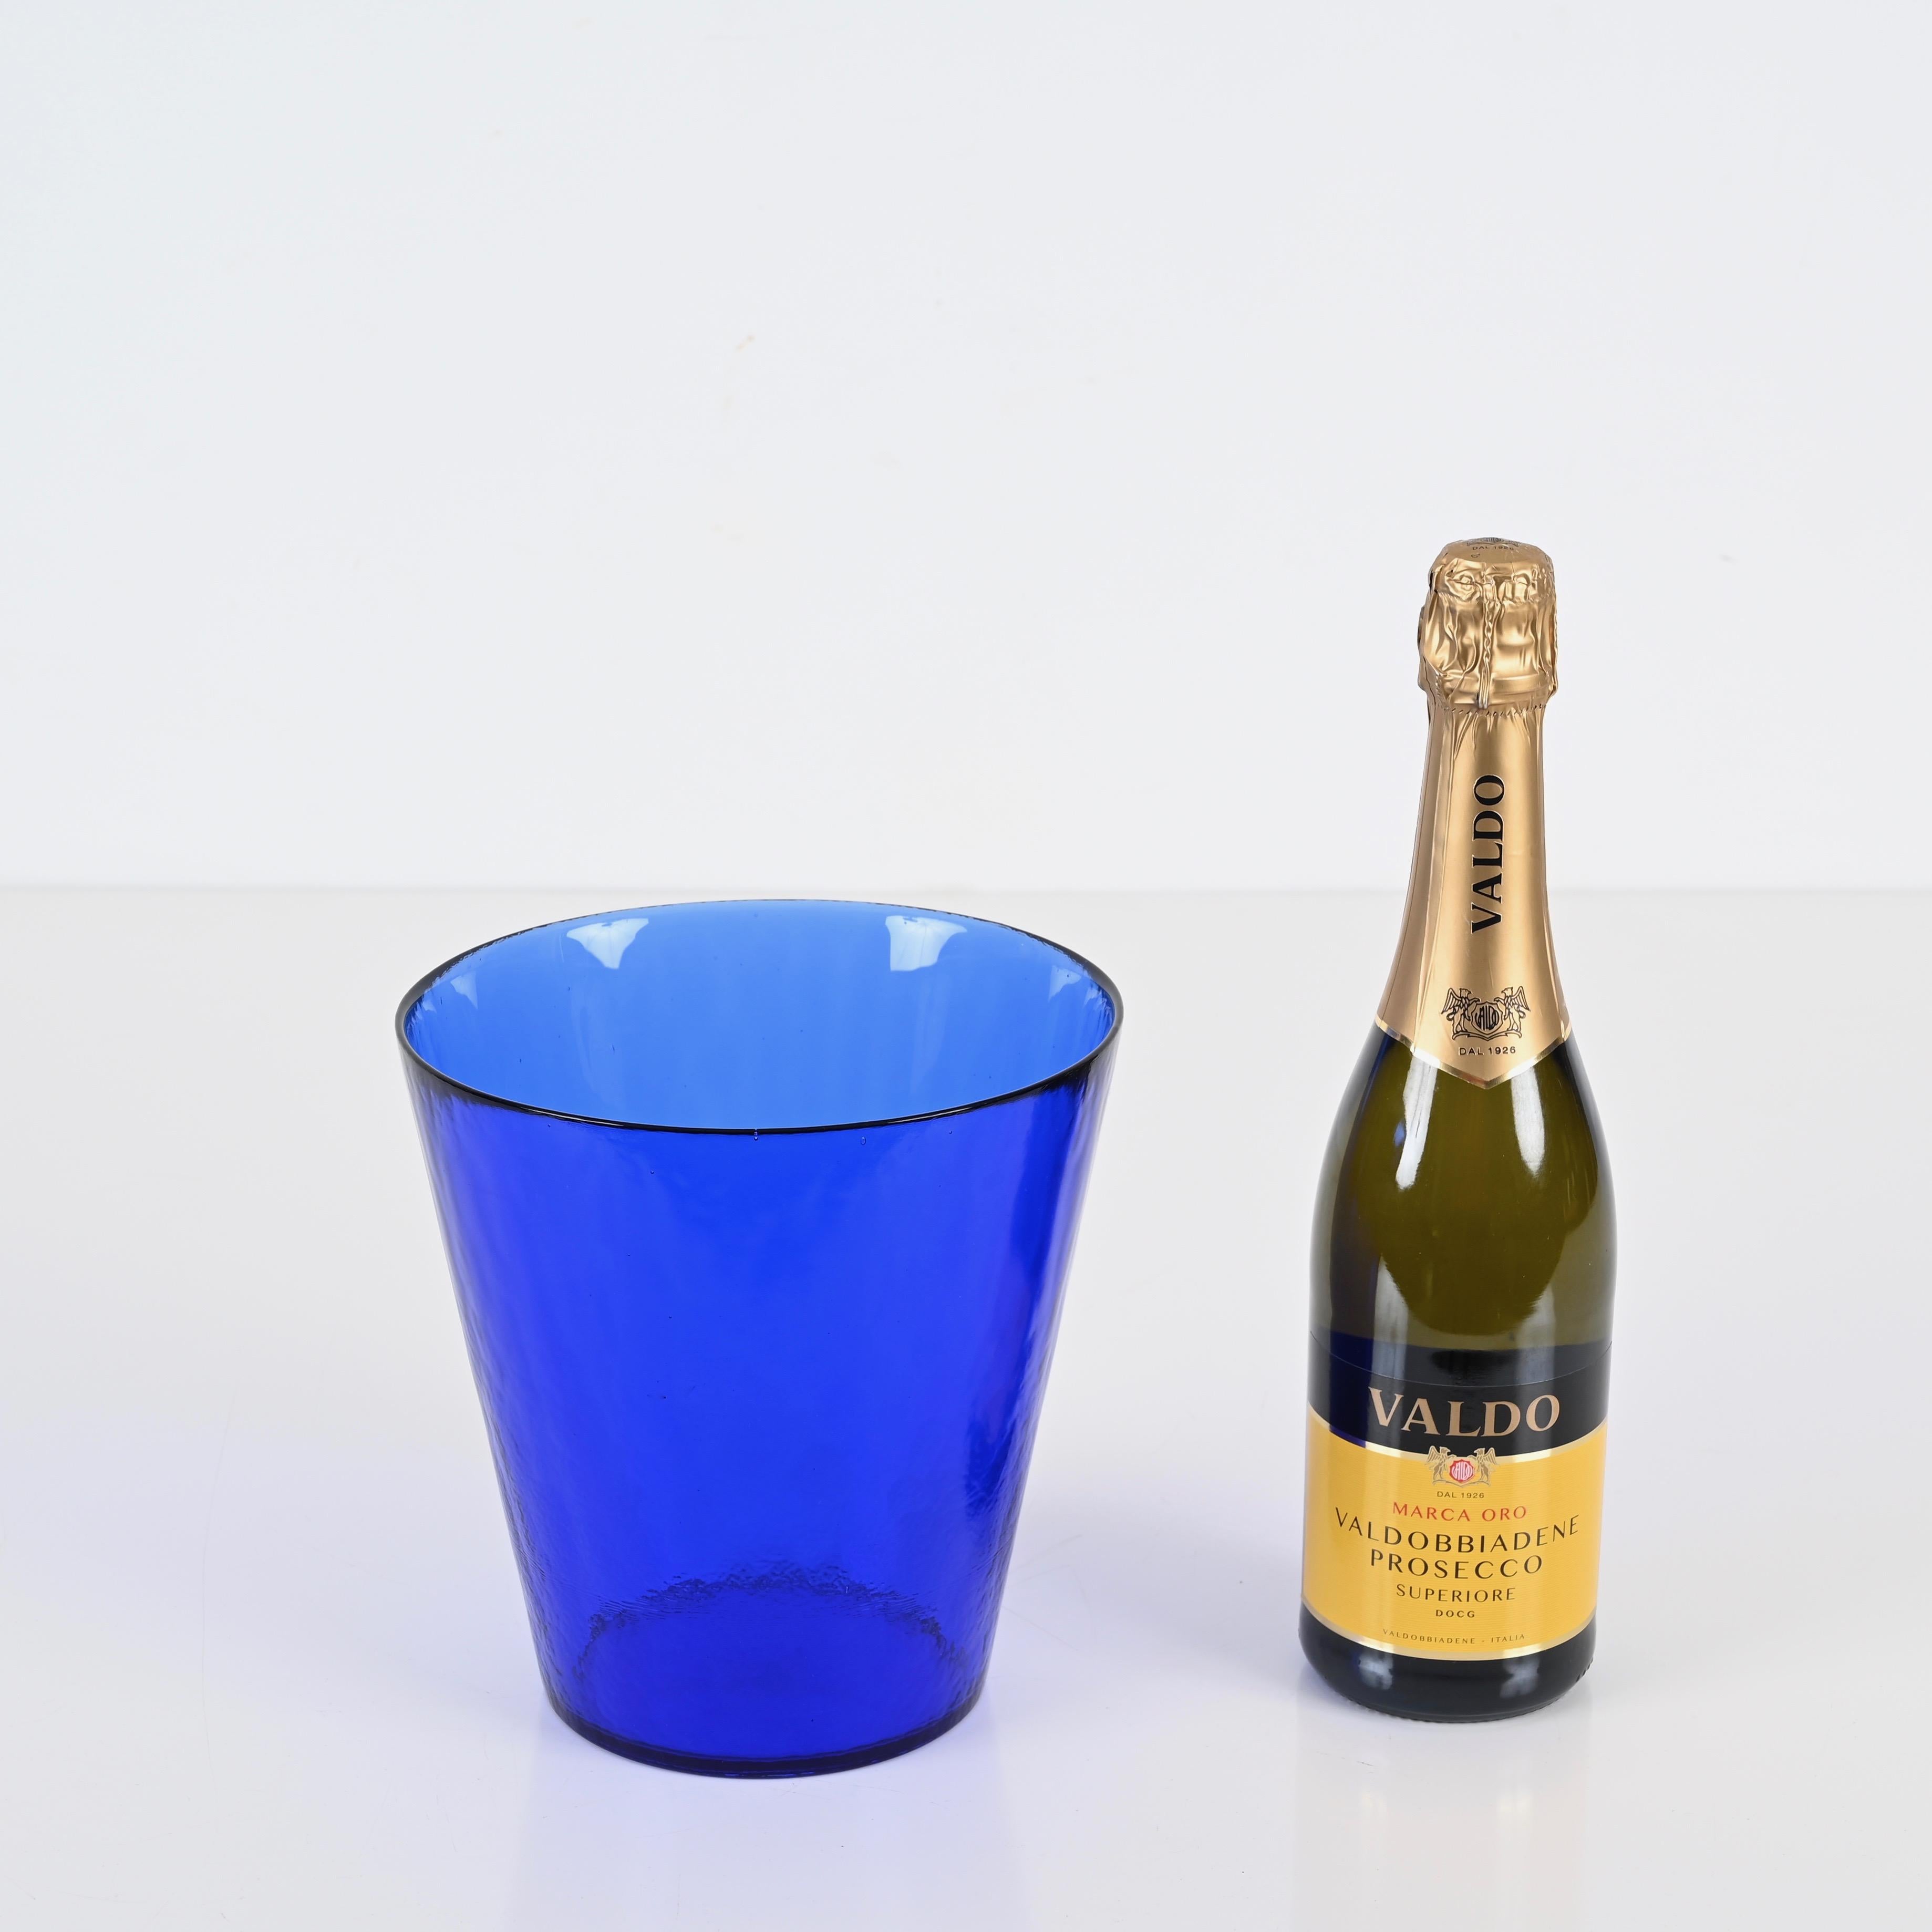 Stunning Ice Bucket in blue Murano glass. This gorgeous piece was made in Murano, Italy in the 1960s.

This ice bucket is made in an incredibly vibrant blue glass. 

The quality of the glasses made by Maestri Vetrai in Murano is world-renowned and